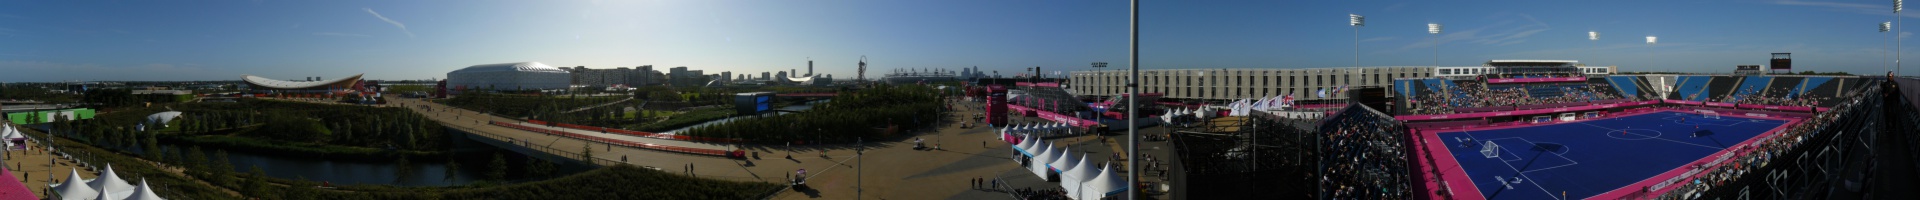 Select this image to see a larger version. panoramio 79024333
5th September, 2012.
Paralympic Games, London.